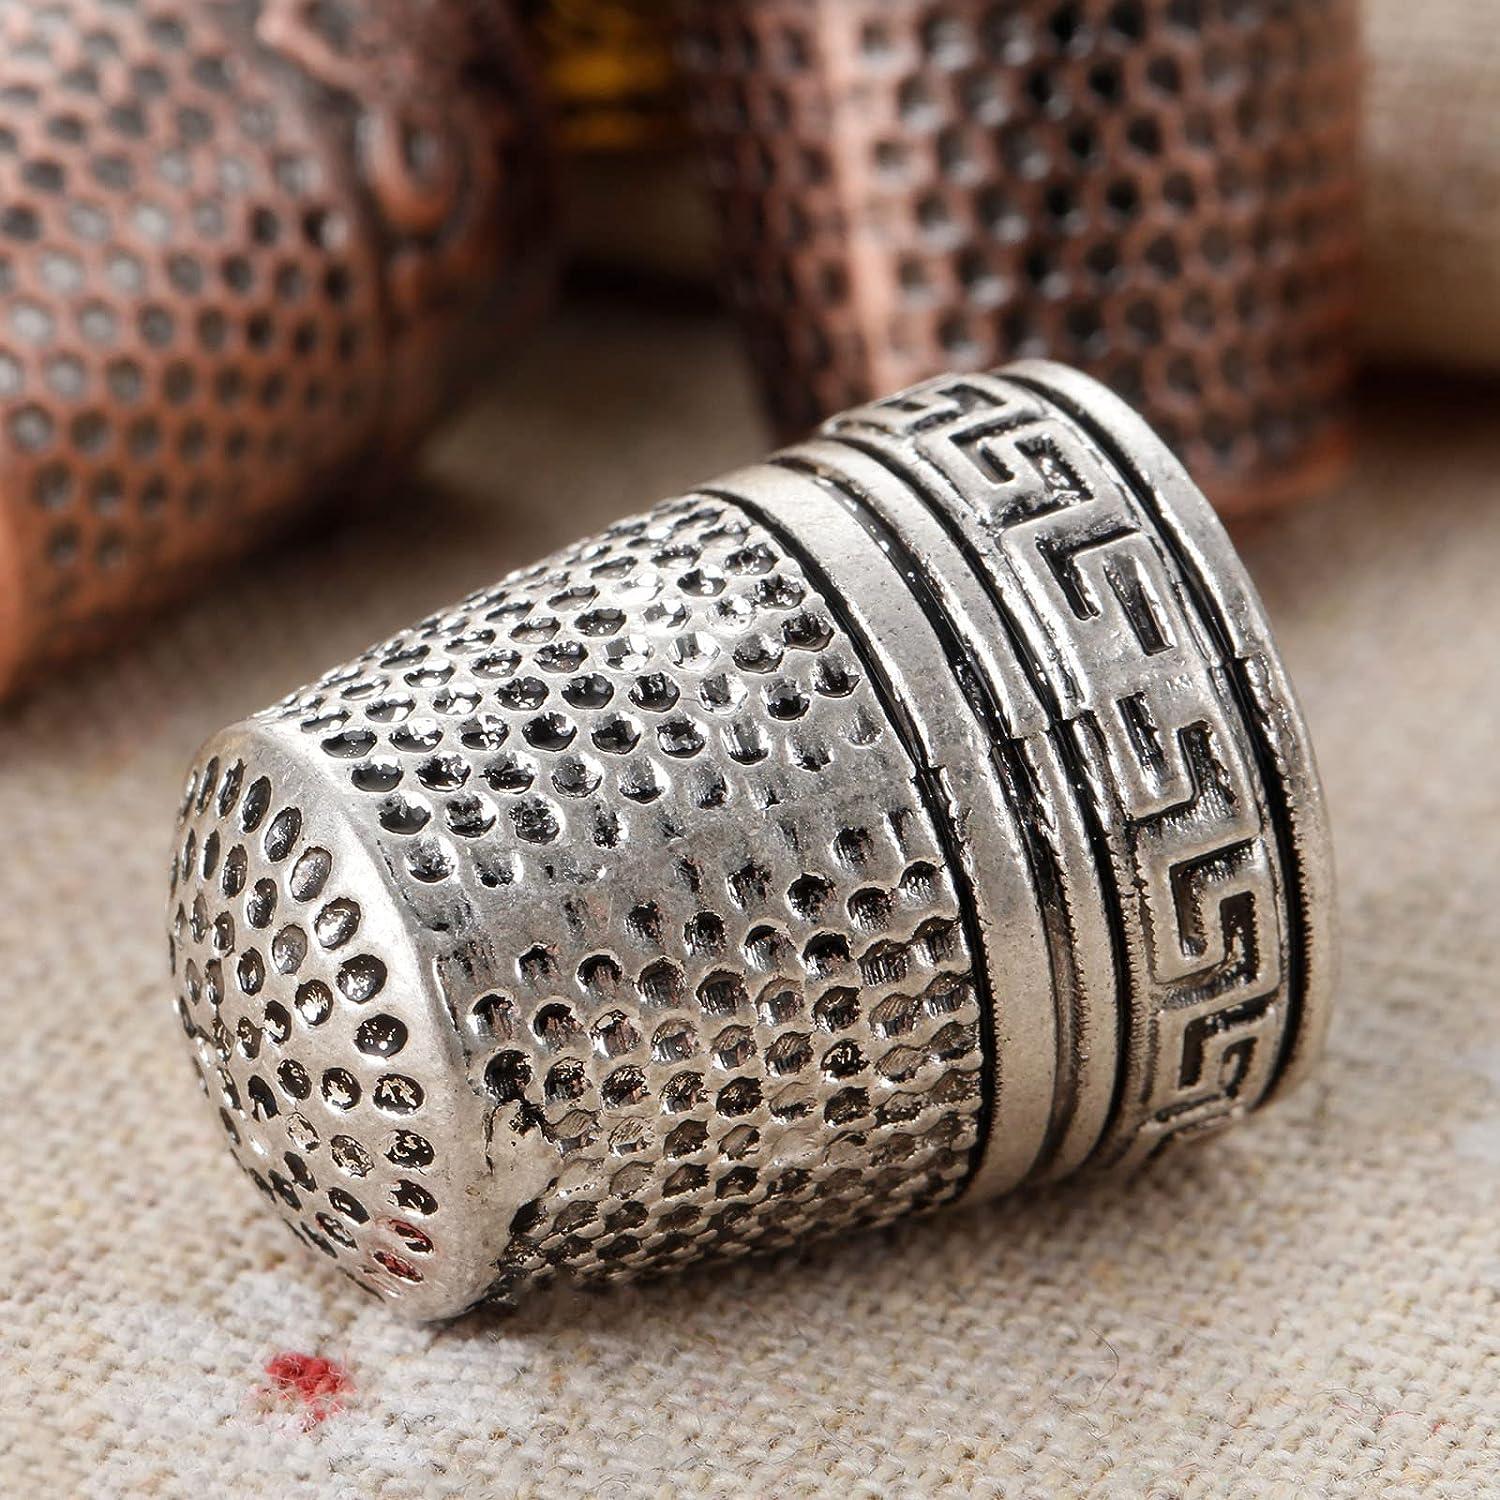 Antique Sewing Thimble Metal Fingertip Protector Finger Shield Ring  Quilting Craft Accessories DIY Sewing Tools Silver